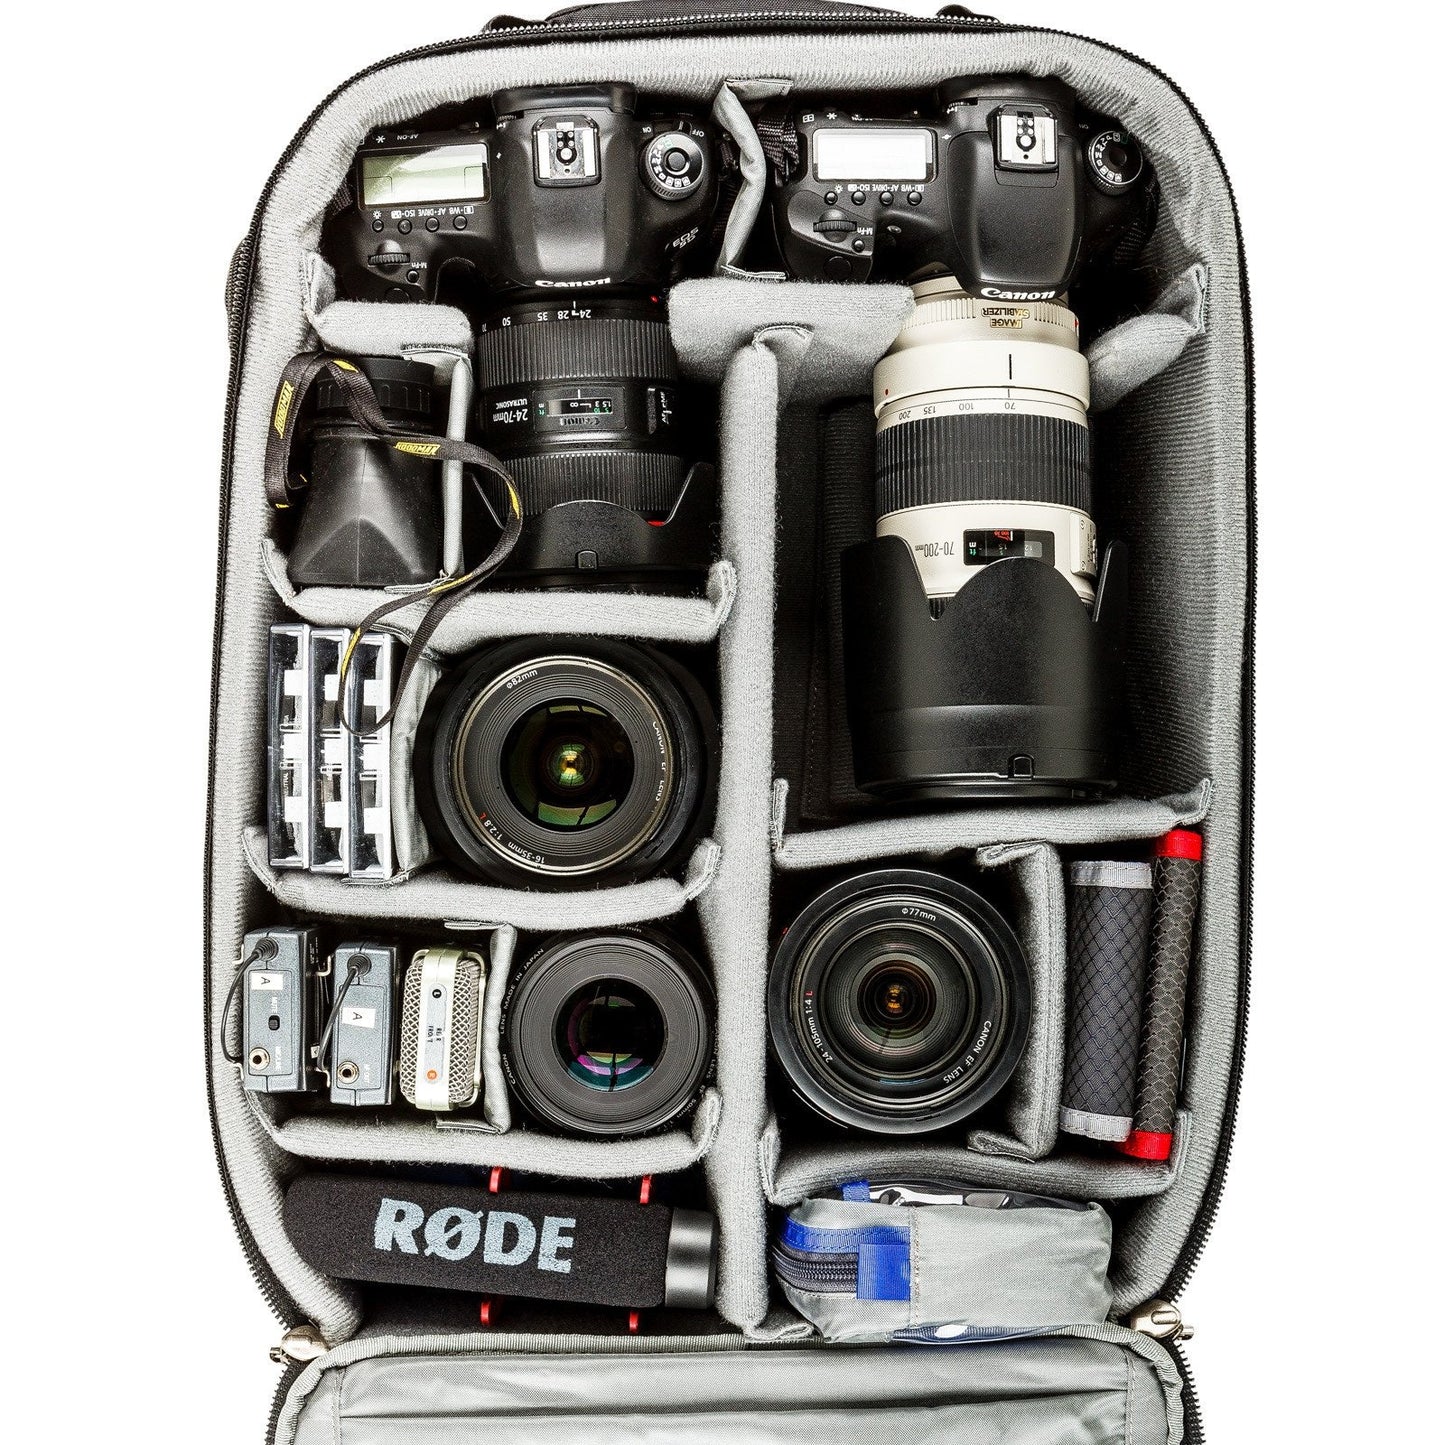 Two gripped DSLRs with five lenses and additional audio recording accessories